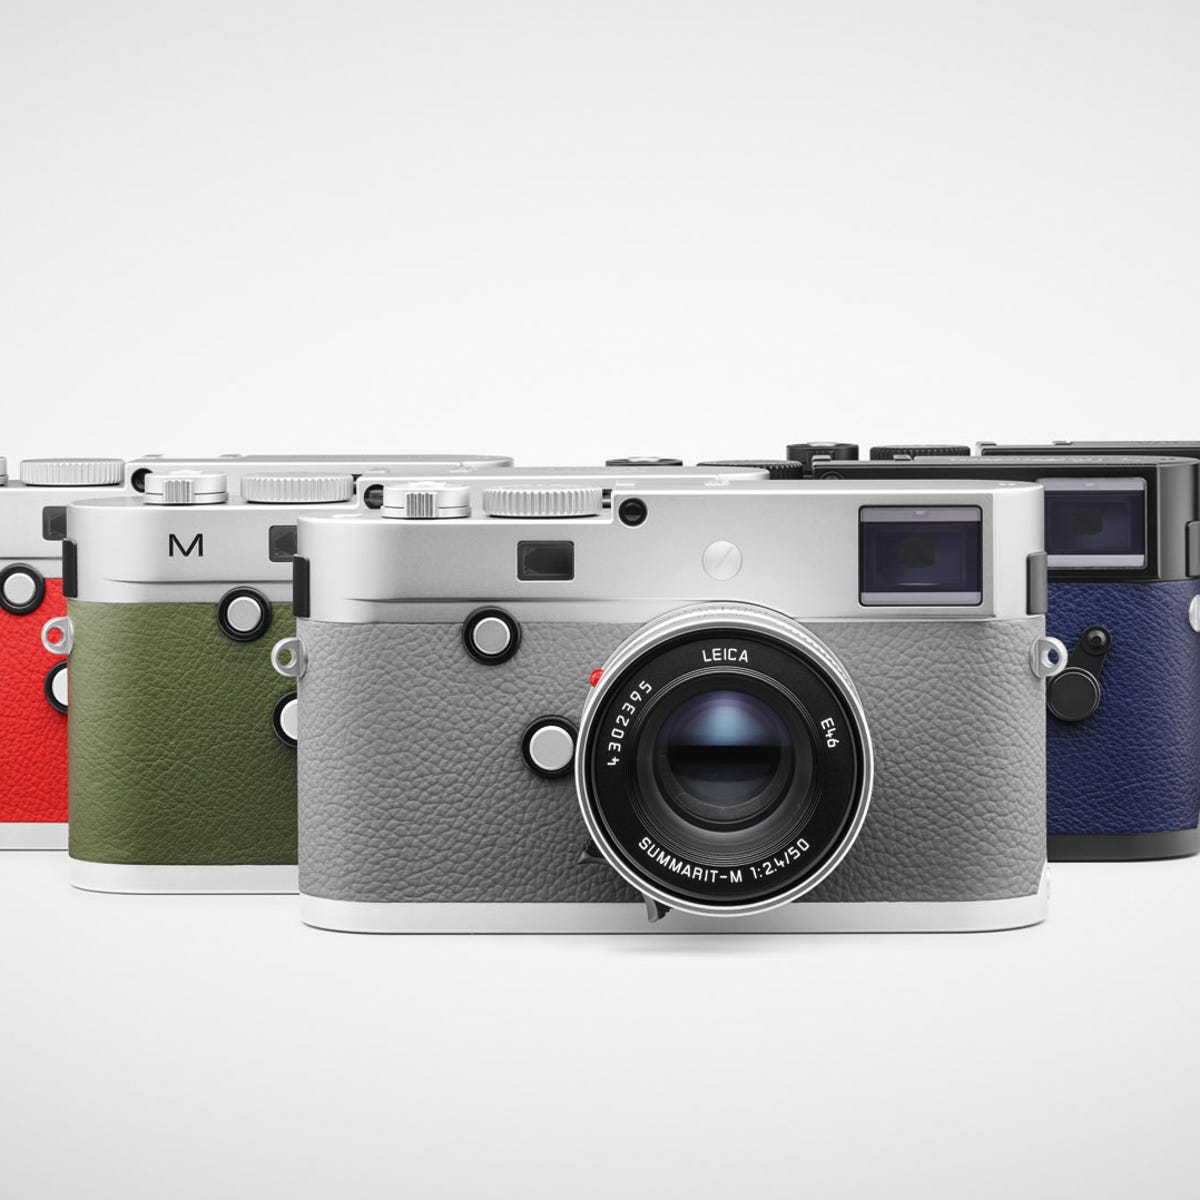 Leica M camera gets pared down and prettied up - CNET